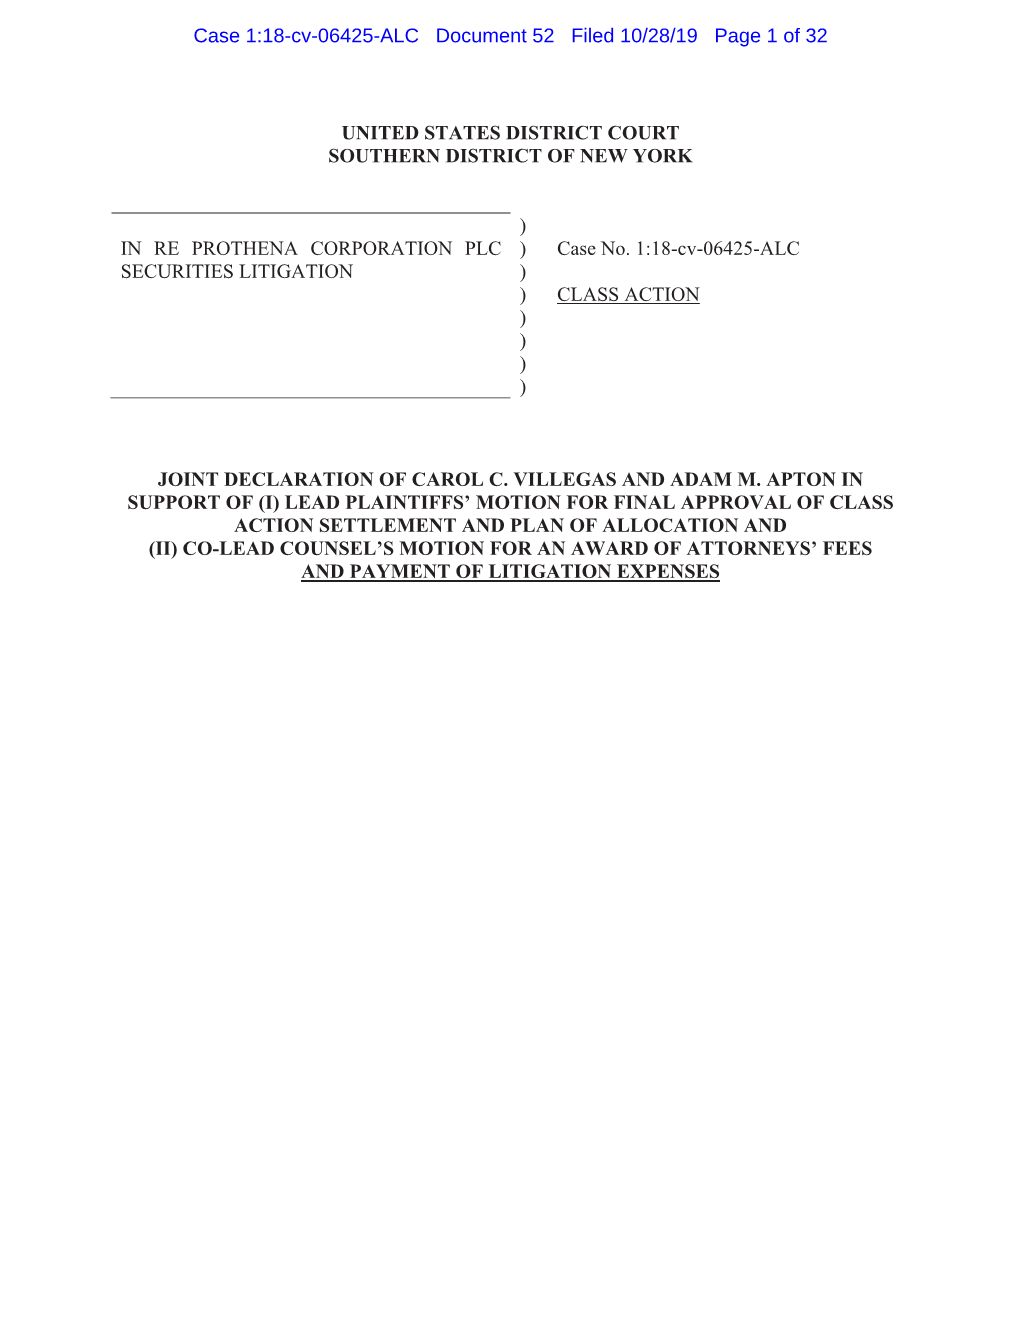 Case 1:18-Cv-06425-ALC Document 52 Filed 10/28/19 Page 1 of 32